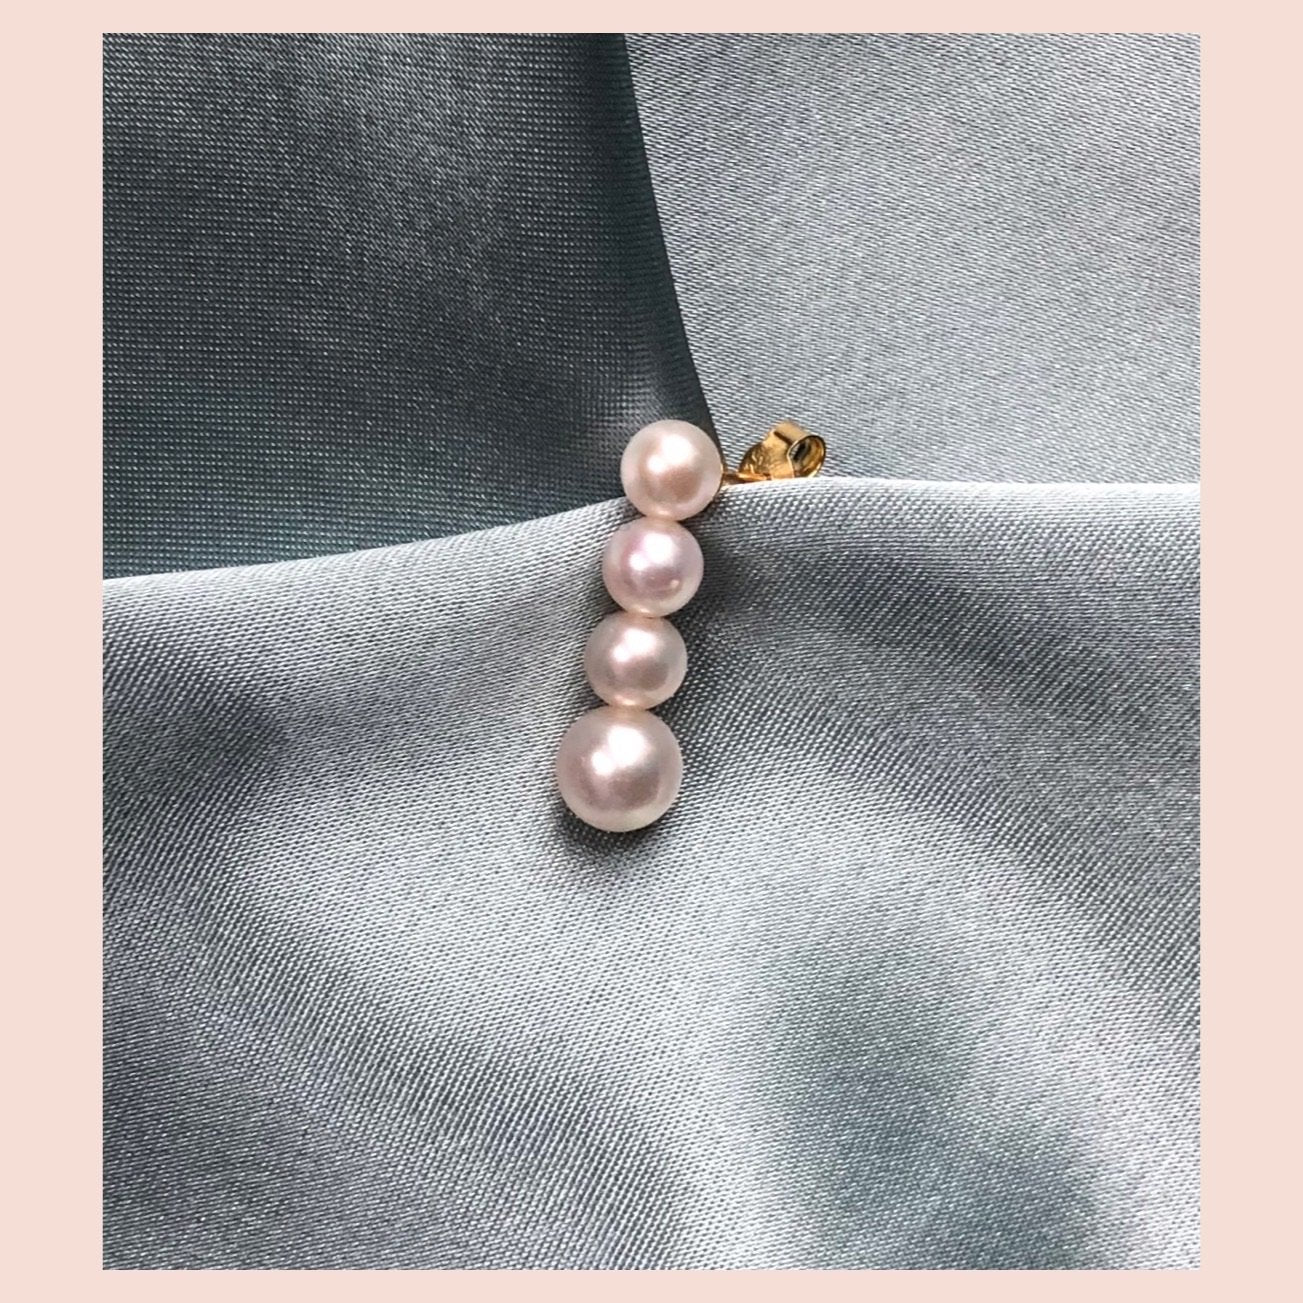 Quatra Stud Earring -  Gold Plated Silver  Freshwater Pearls